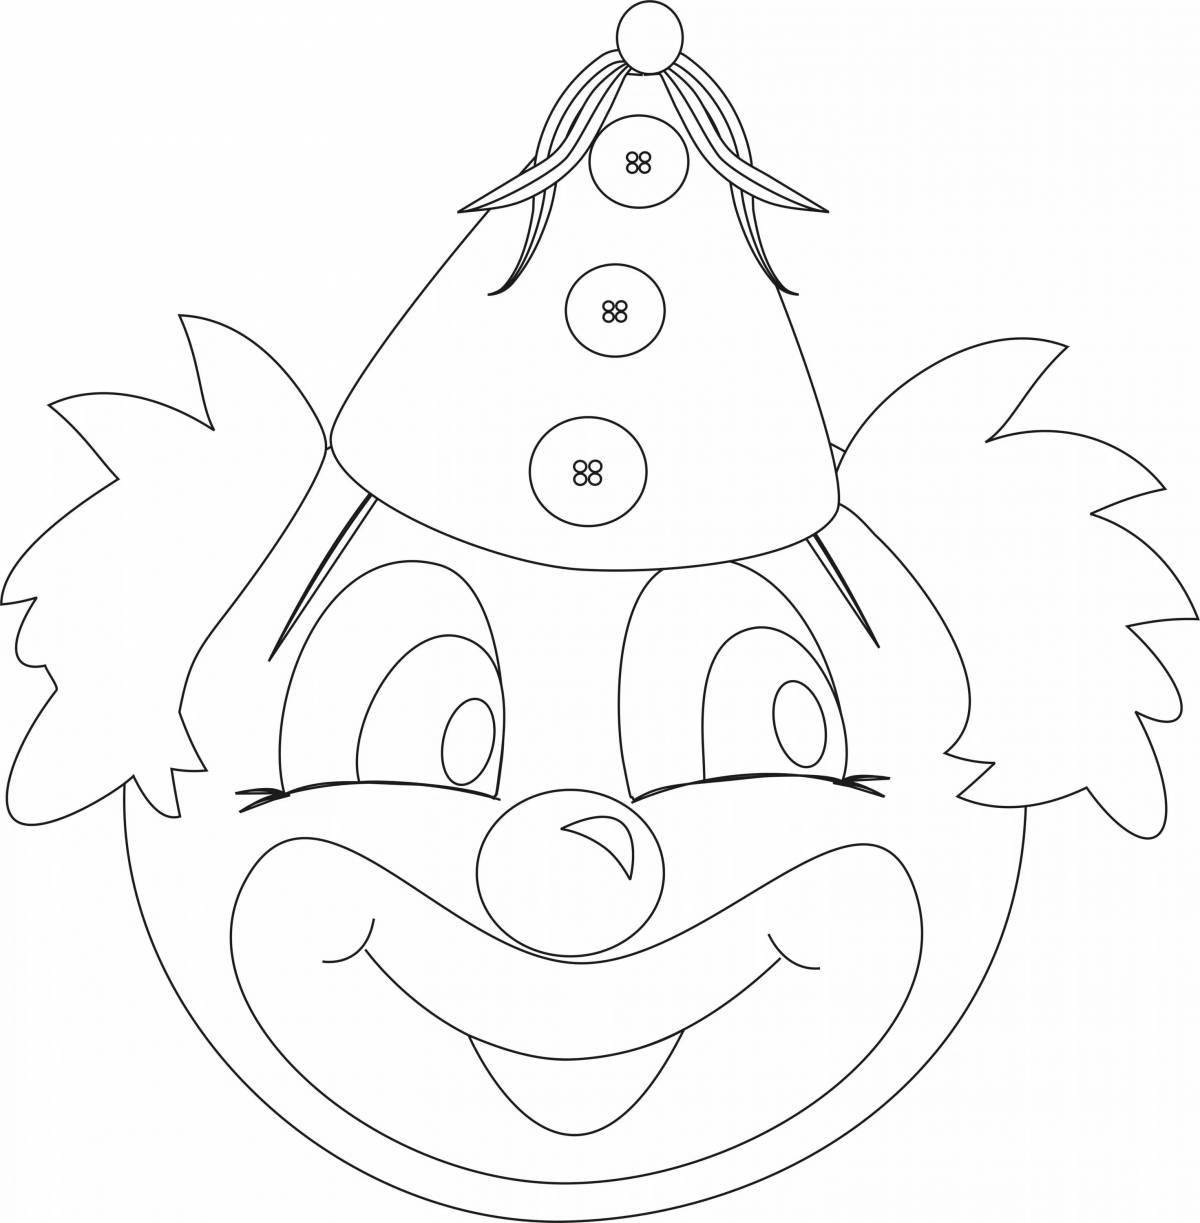 Bright clown face coloring page for kids